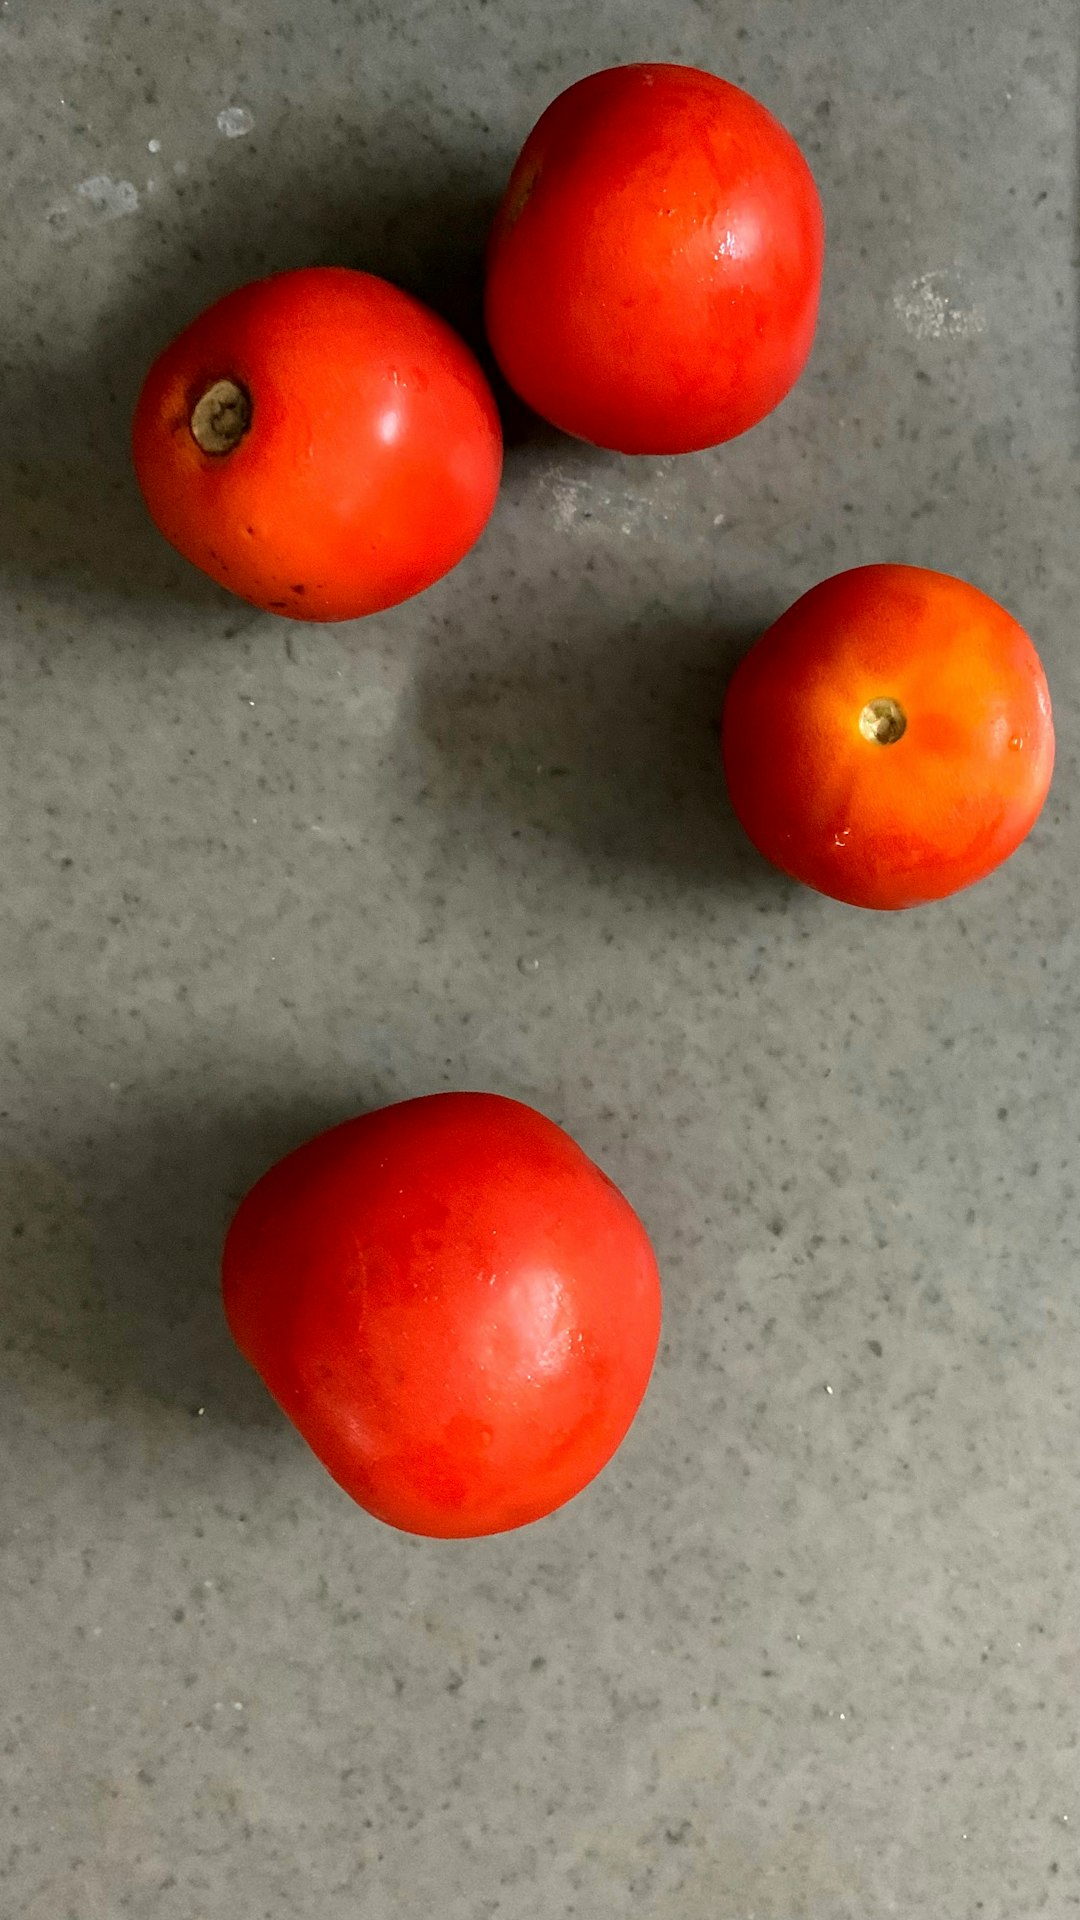 3 red tomatoes on gray surface